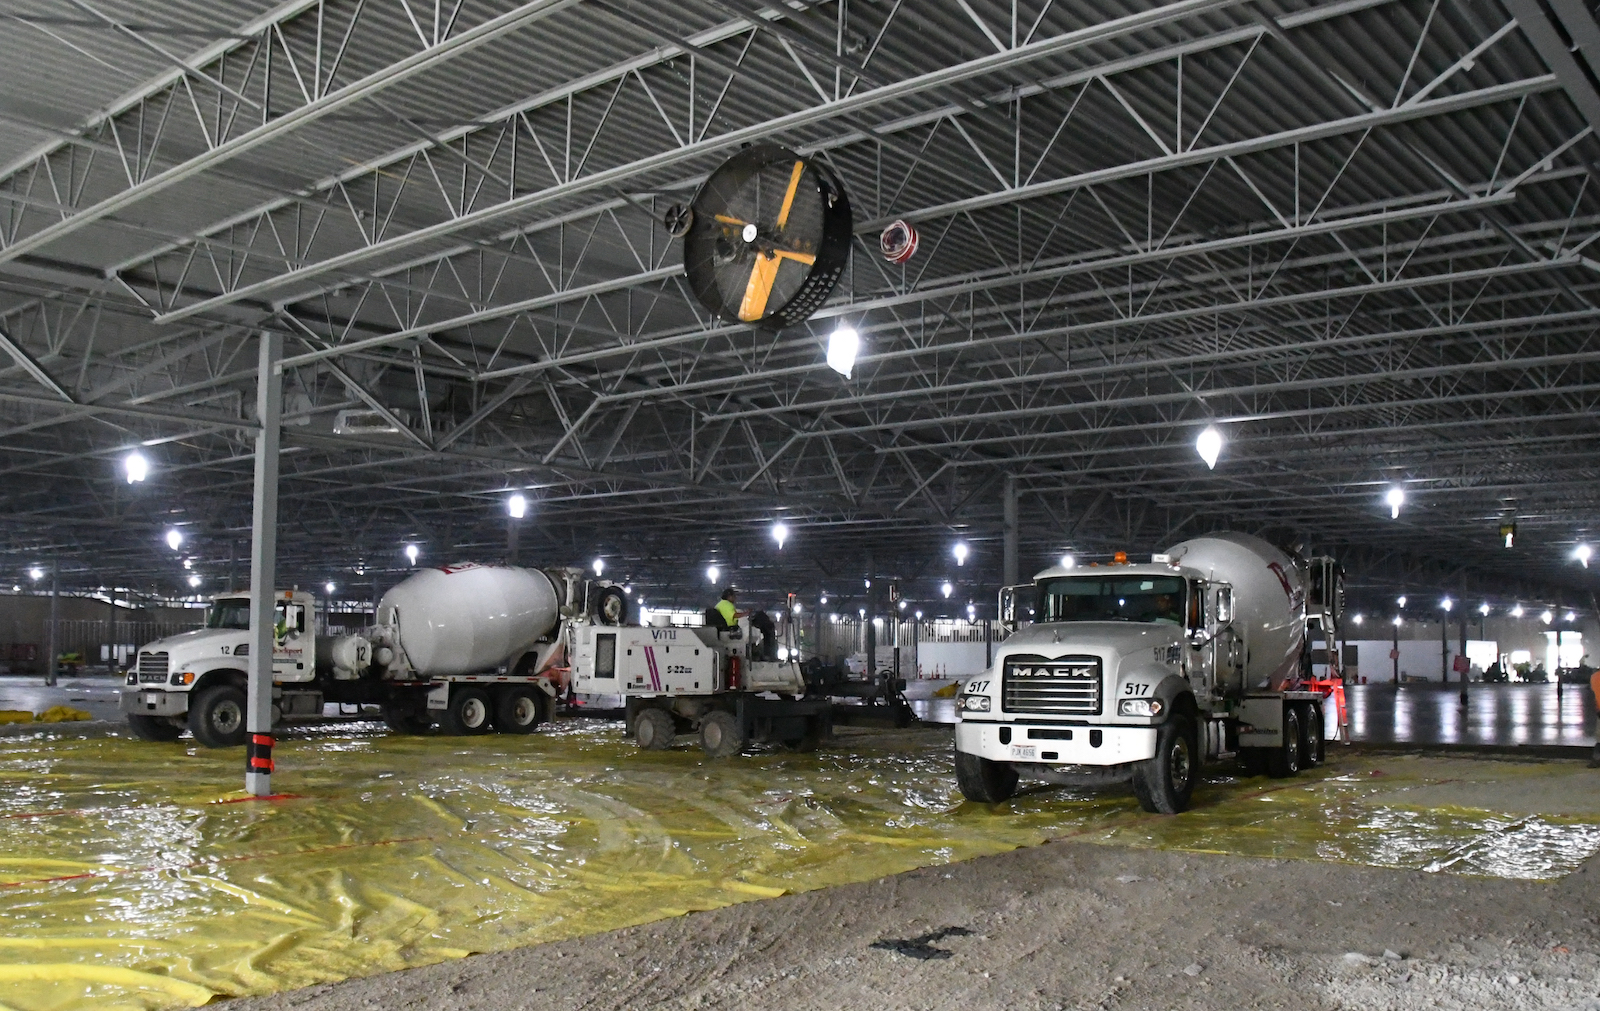 Concrete trucks are pointed towards camera during the pouring of concrete inside large building.